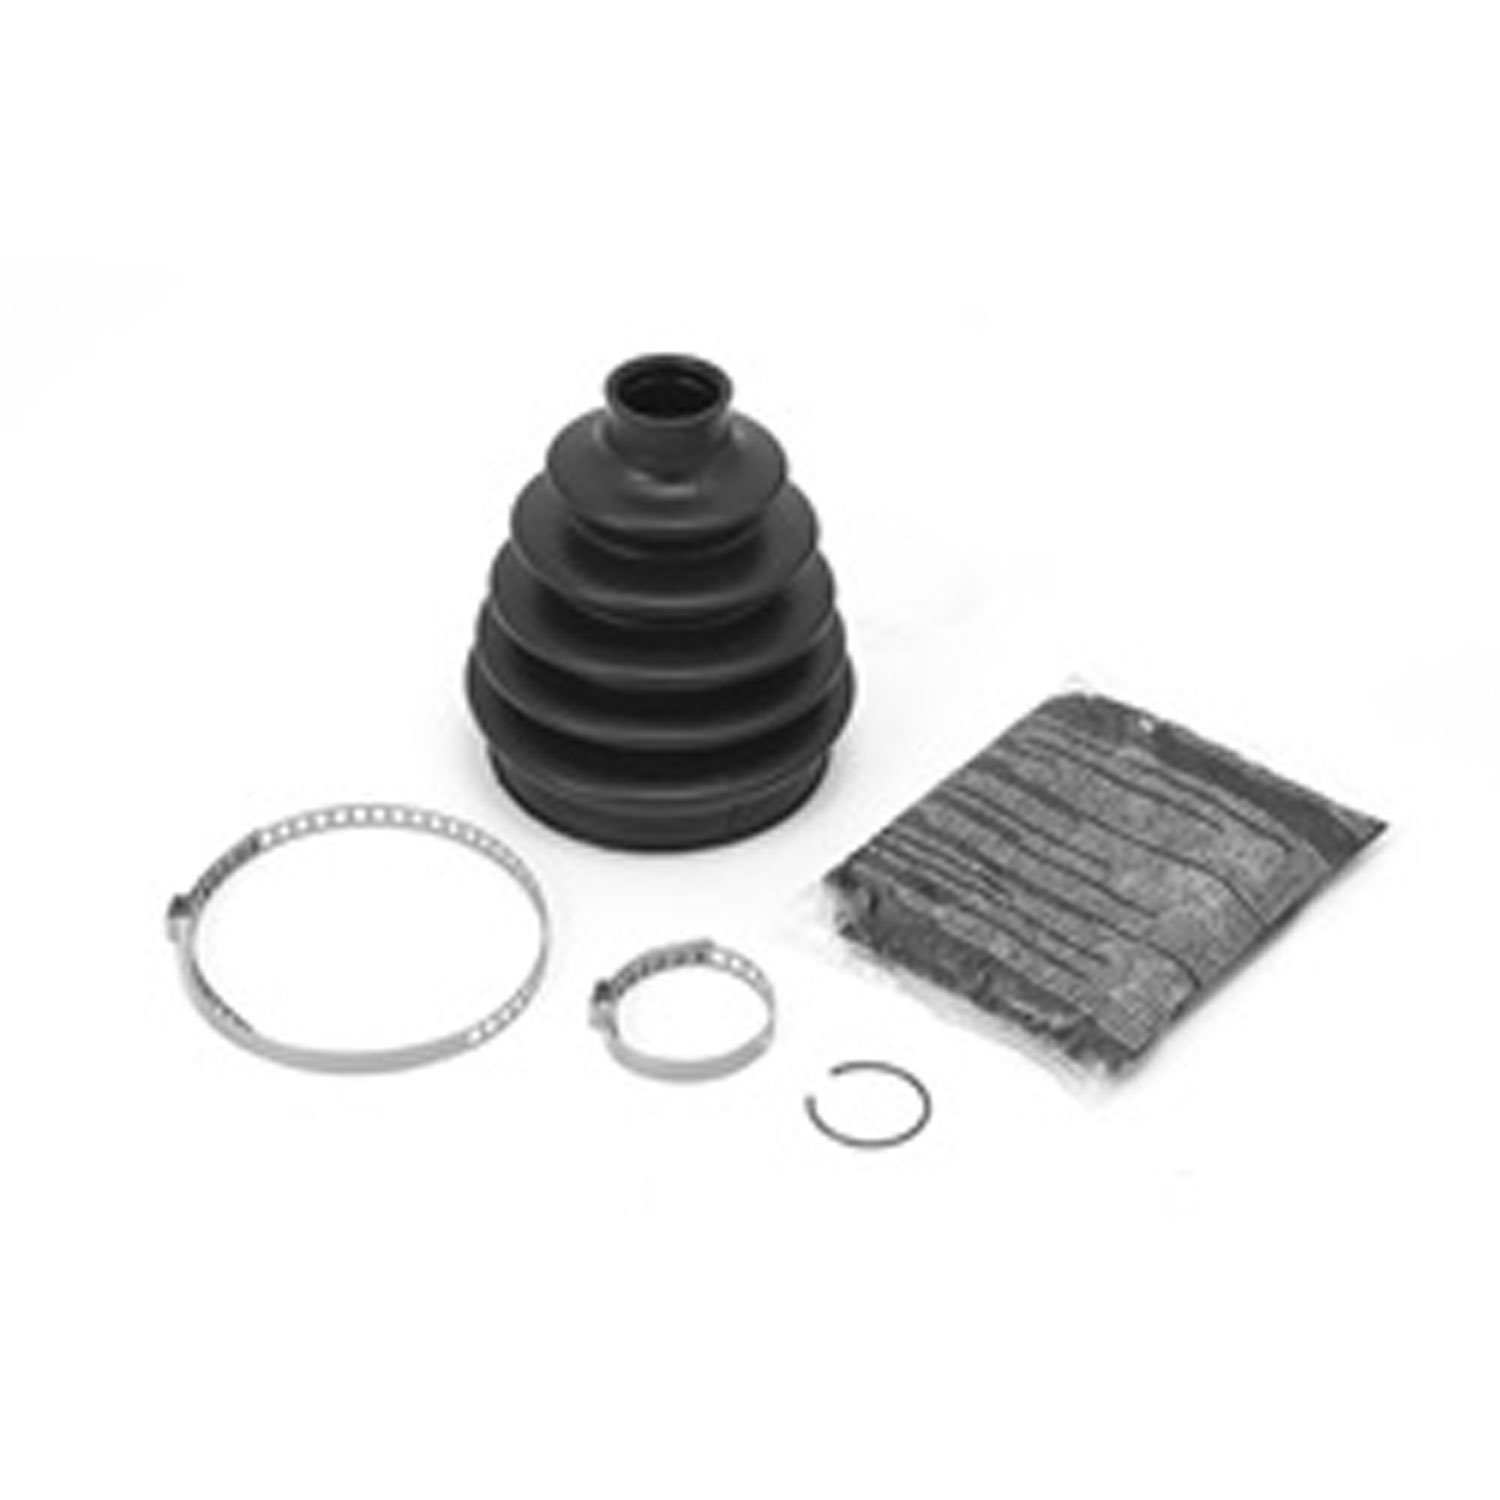 This front inner axle CV boot kit from